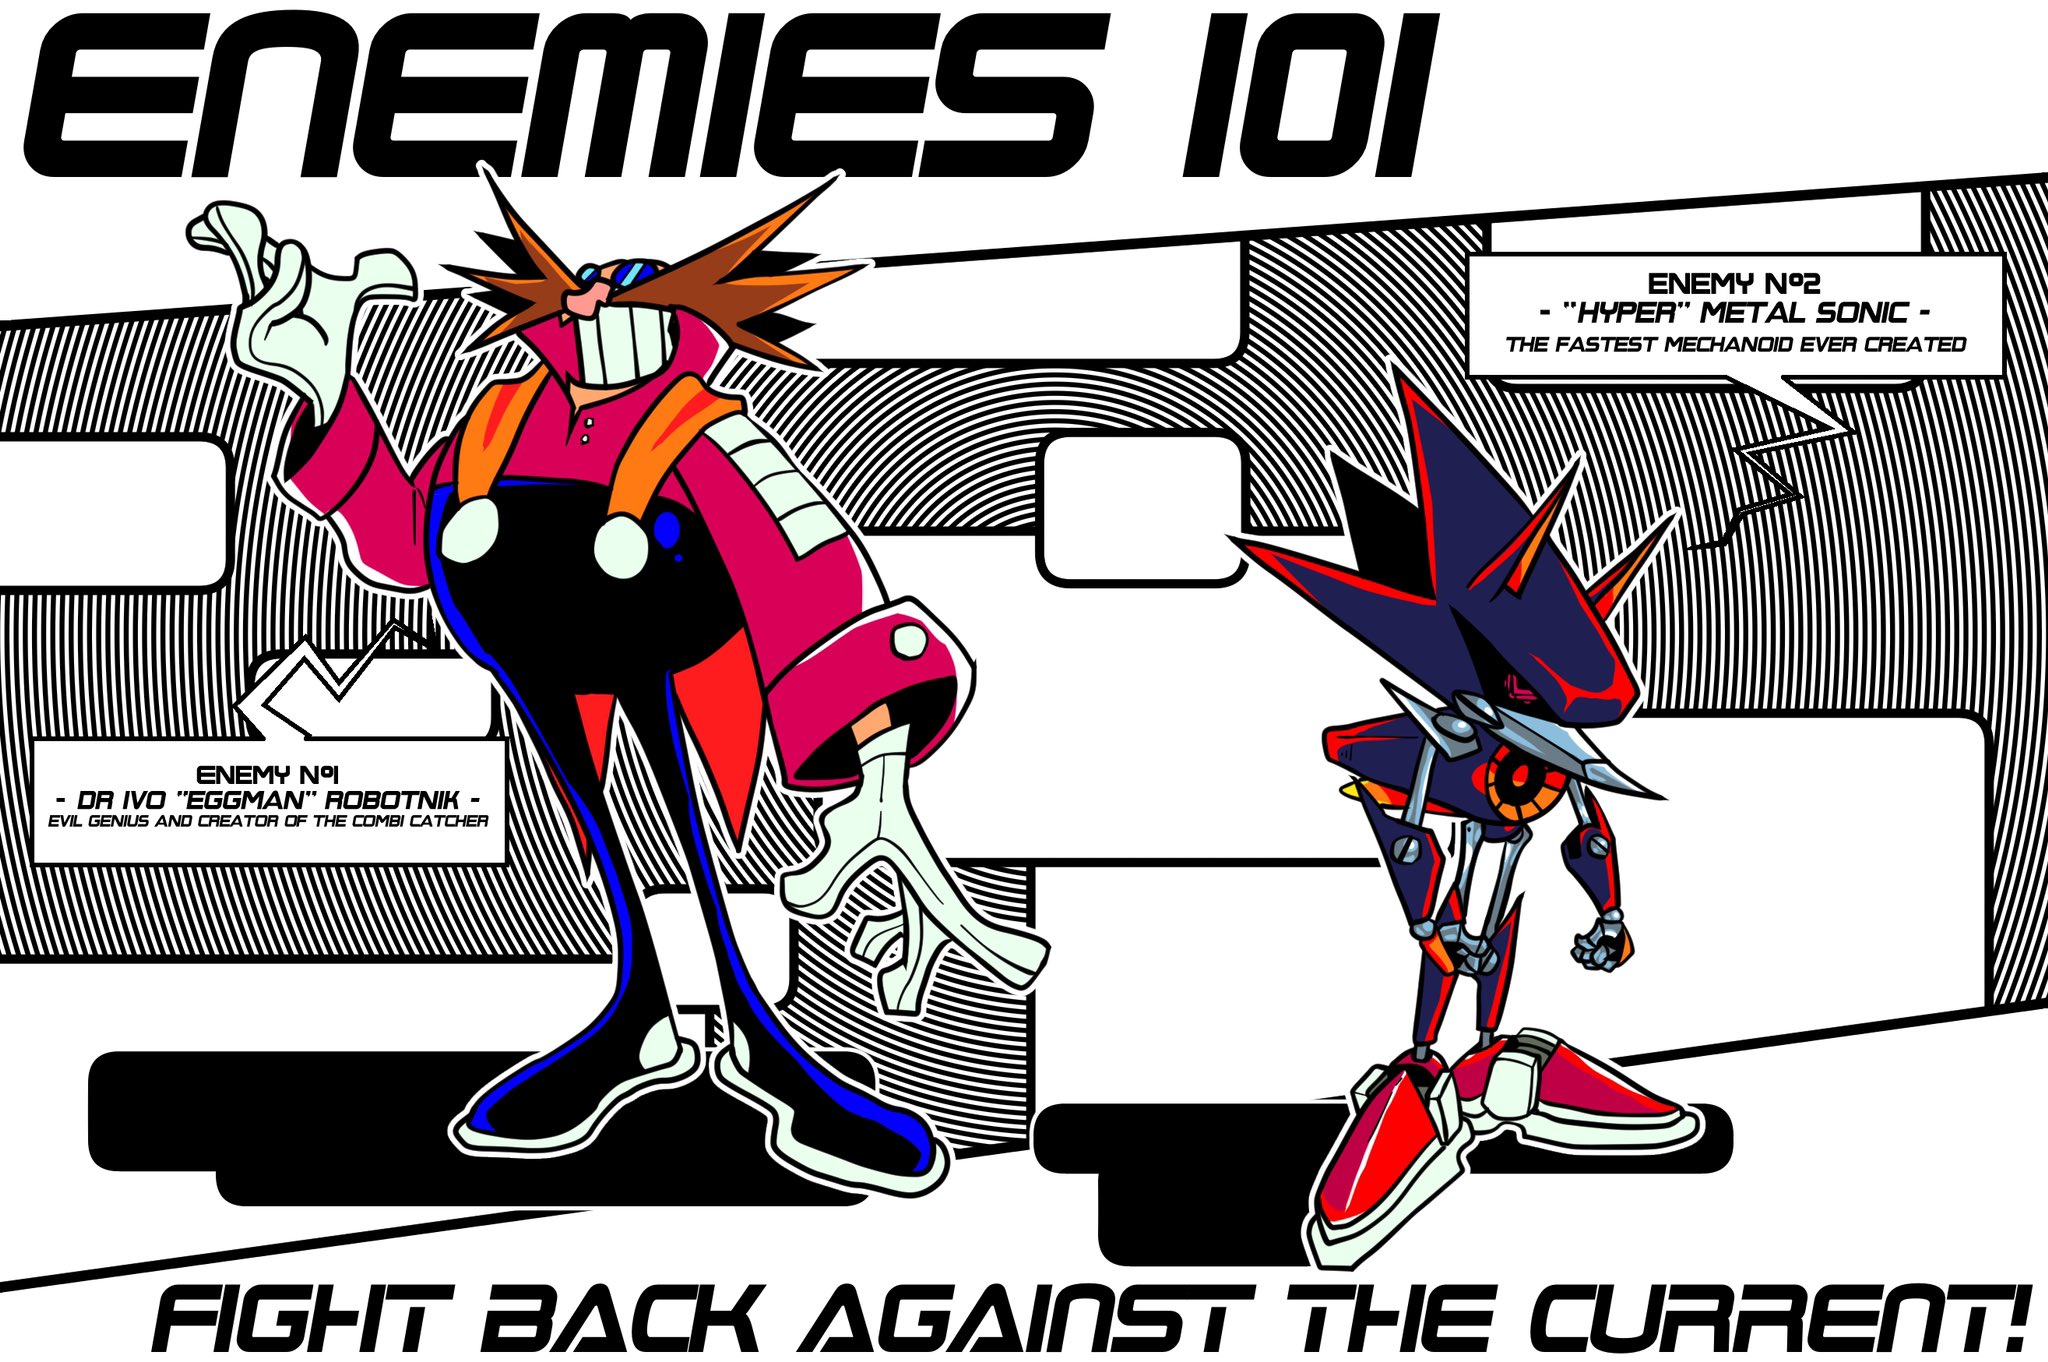 CHAOTIX KAI - A NEW ERA on X: all character redesigns for